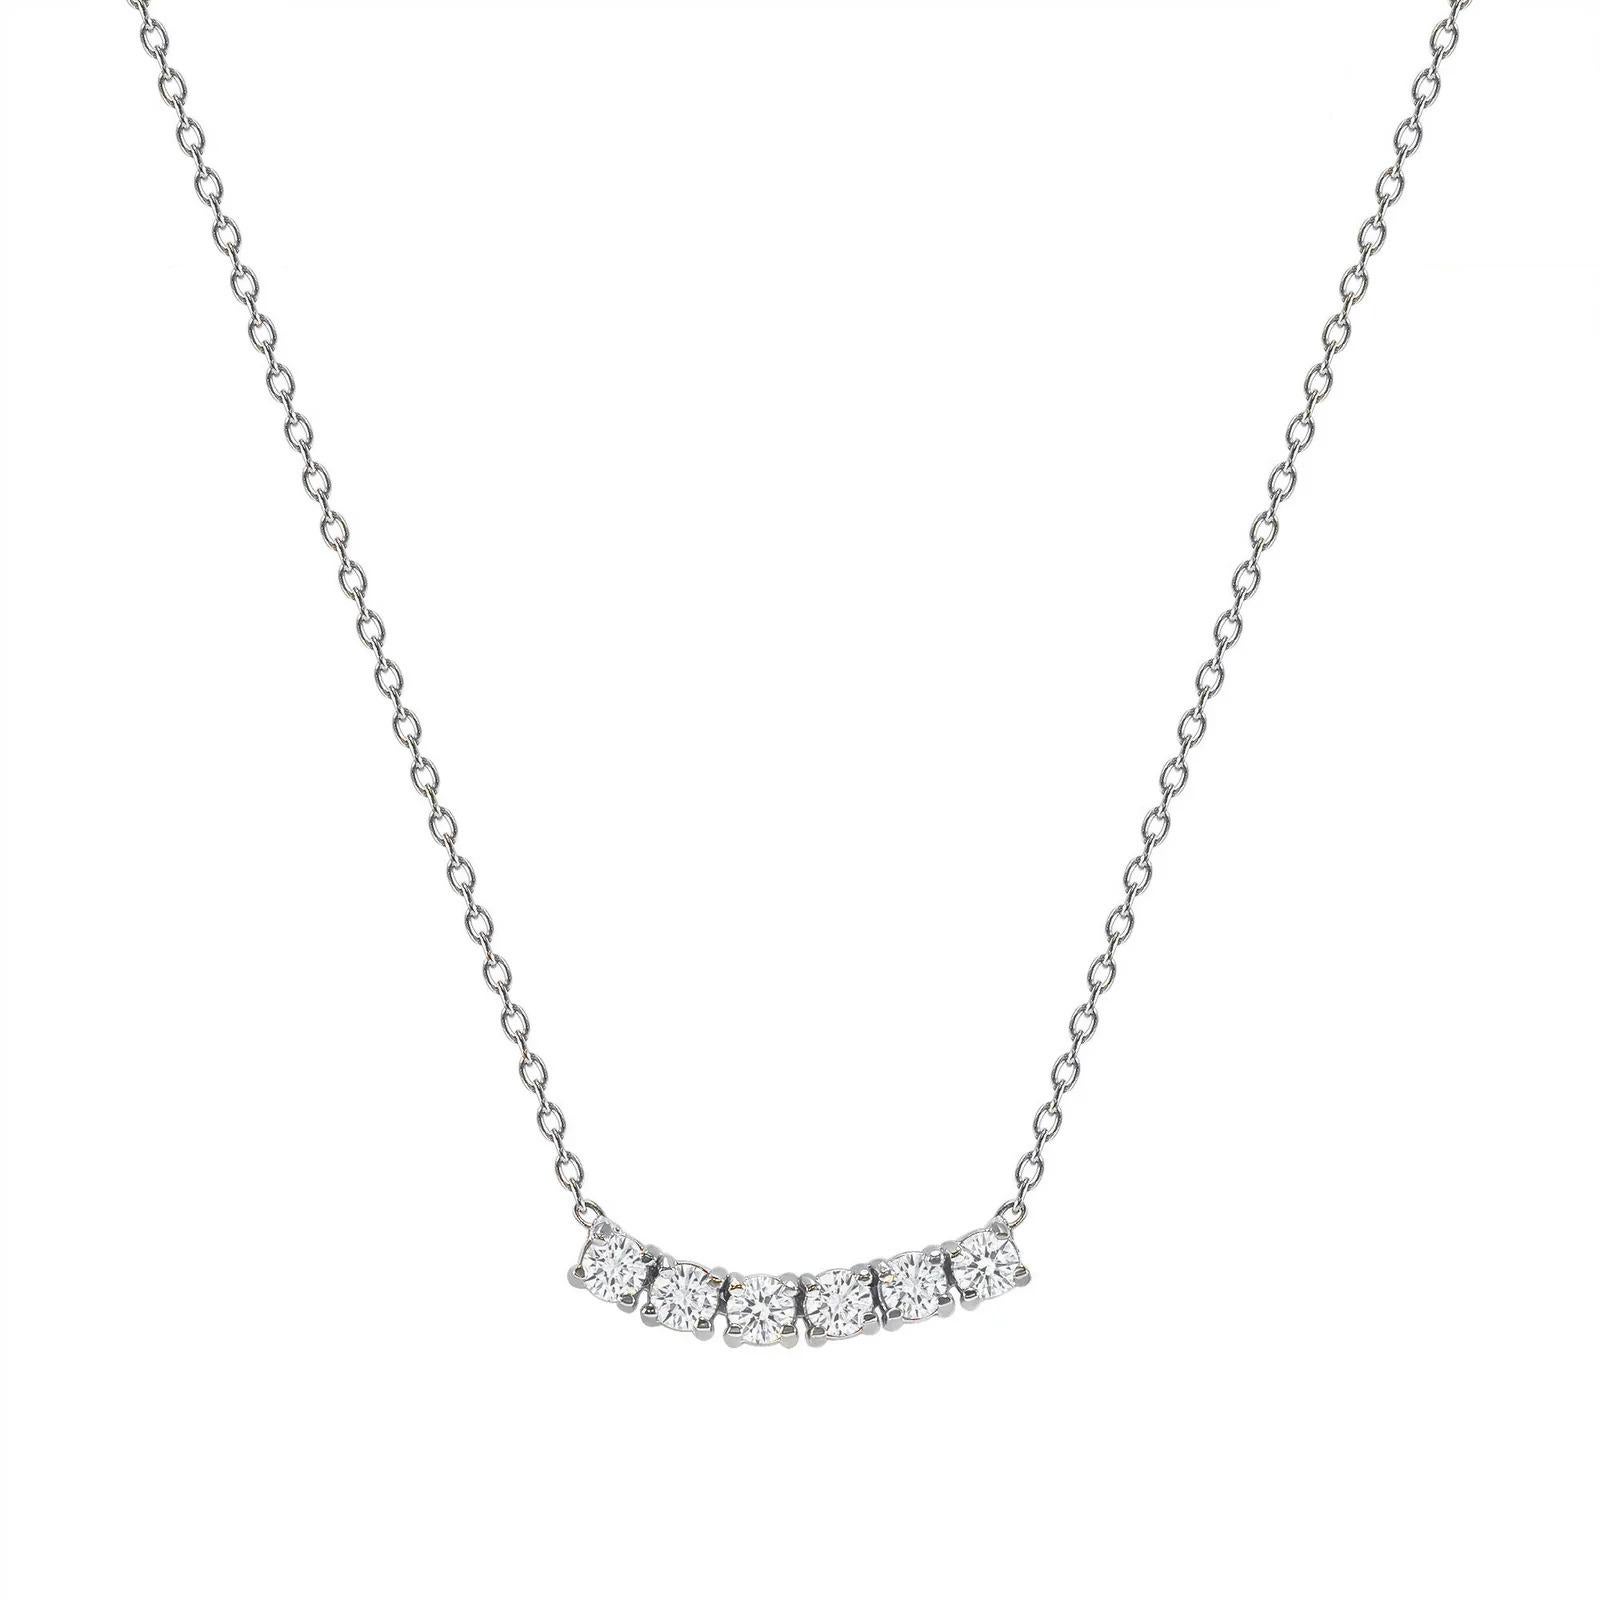 This petite, curved diamond necklace is crafted with gorgeous 14k gold set with six round diamonds.  

Gold: 14k 
Diamond Total Carats: 0.50ct
Diamond Cut: Round (6 diamonds)
Diamond Clarity: VS
Diamond Color: F
Color: White Gold
Necklace Length: 16